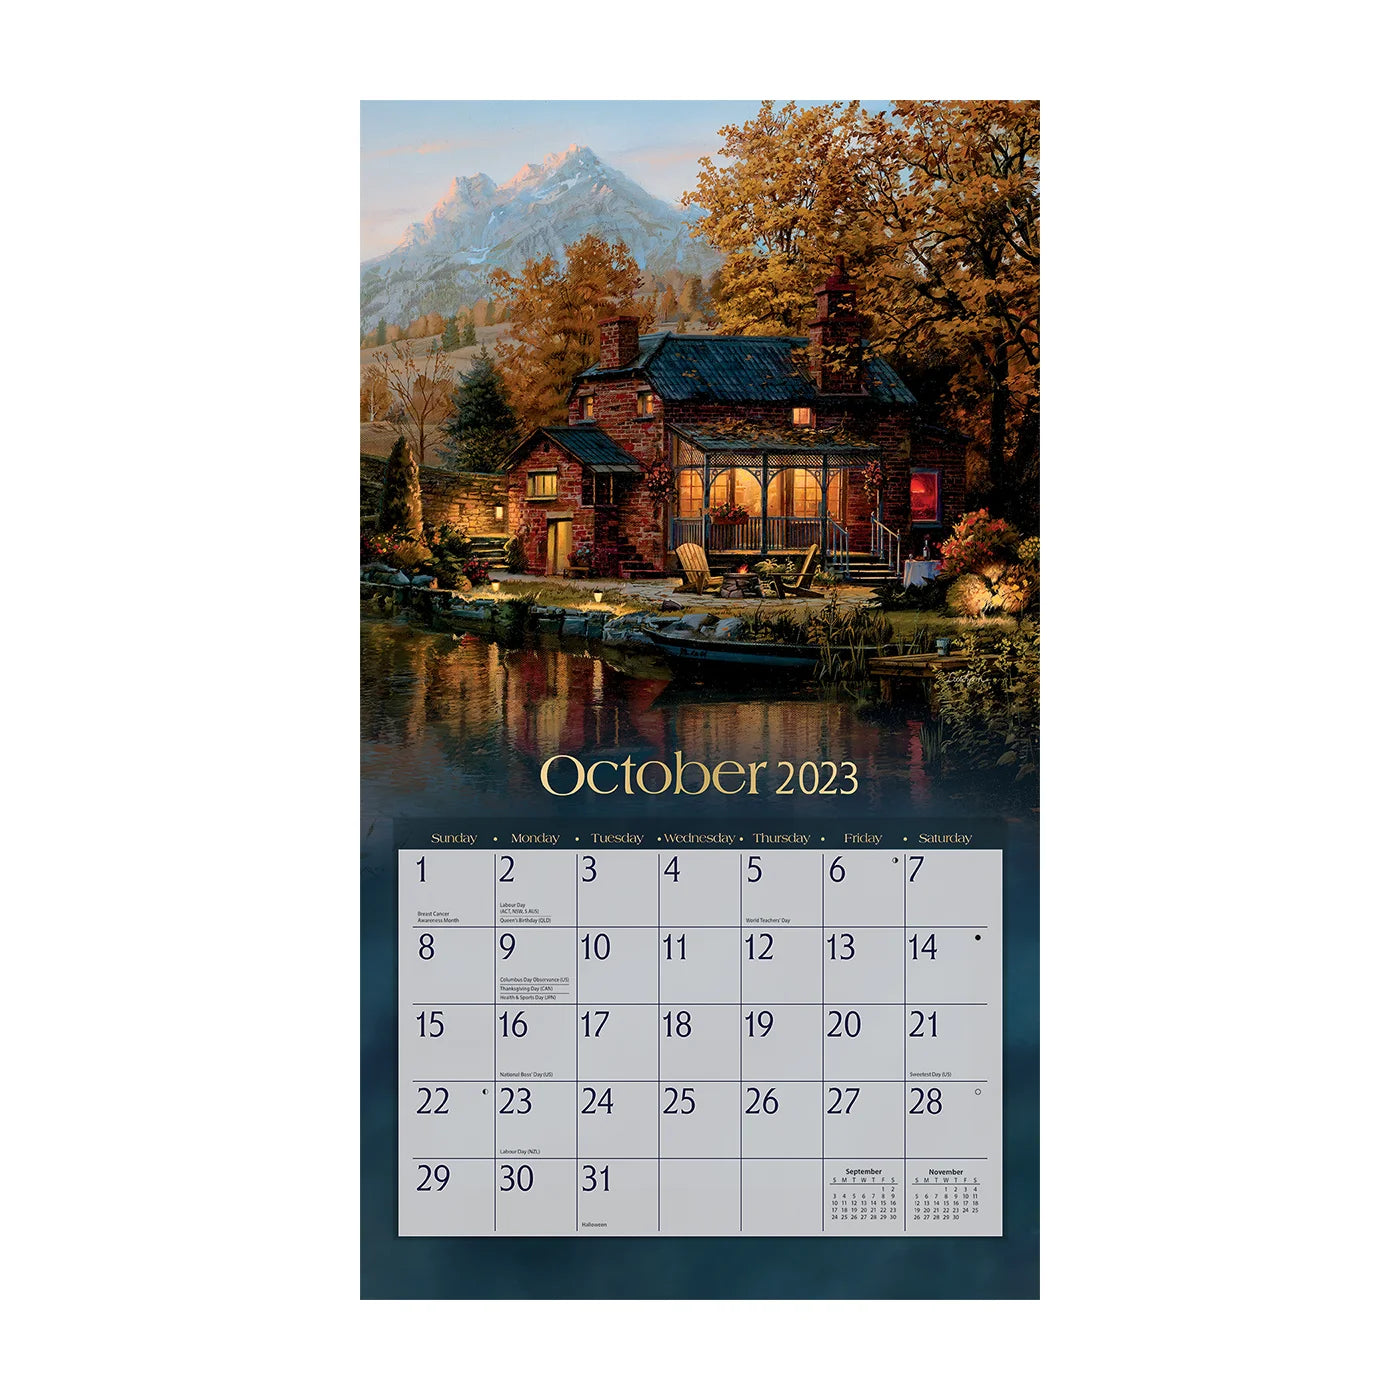 2023 LANG Around The World by Evgeny Lushpin - Deluxe Wall Calendar